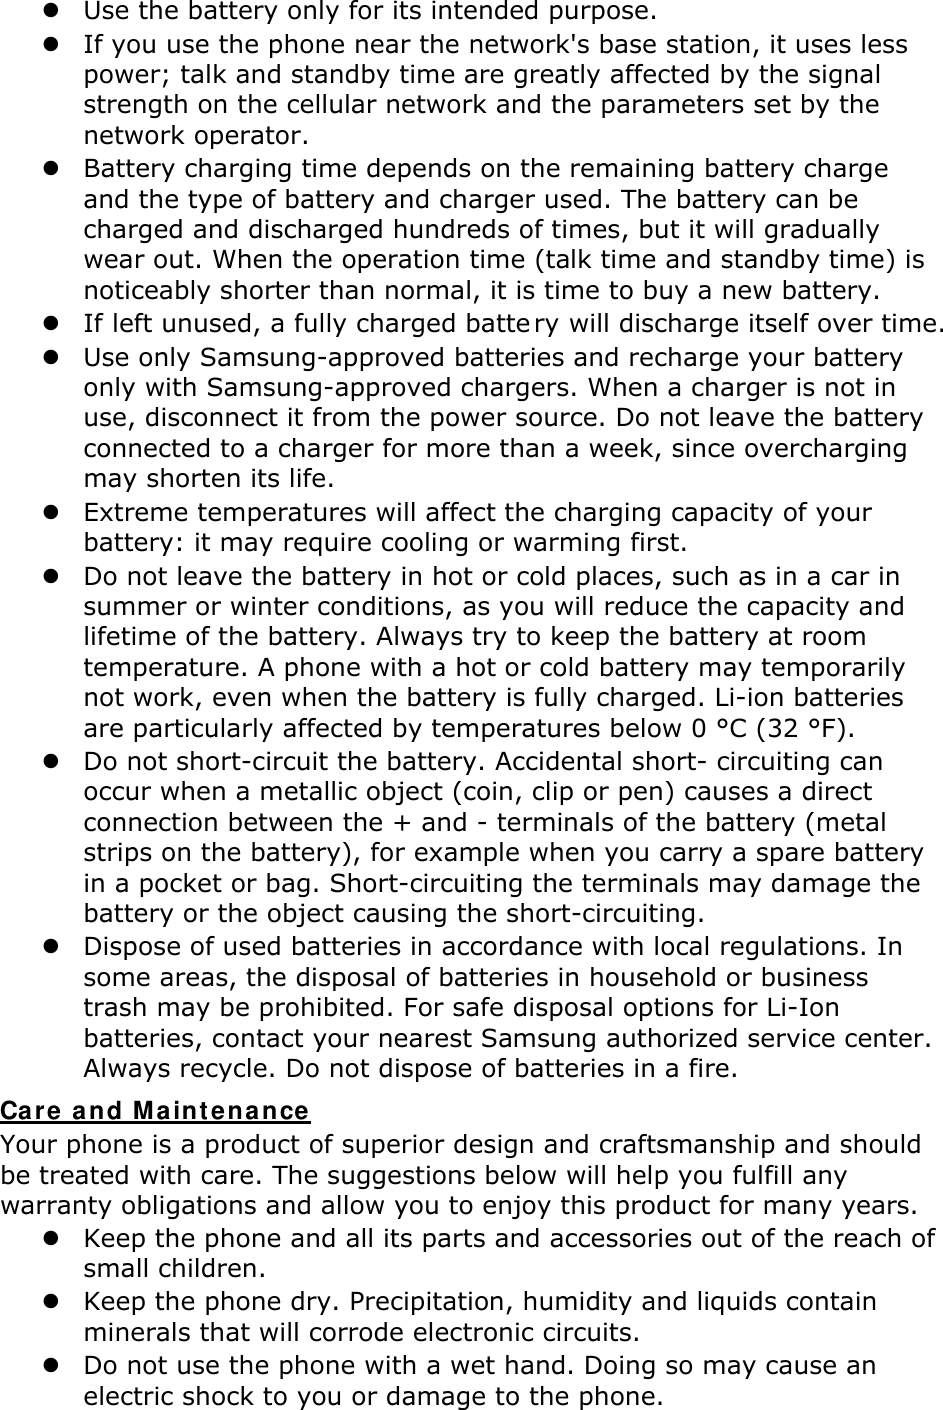  Use the battery only for its intended purpose.  If you use the phone near the network&apos;s base station, it uses less power; talk and standby time are greatly affected by the signal strength on the cellular network and the parameters set by the network operator.  Battery charging time depends on the remaining battery charge and the type of battery and charger used. The battery can be charged and discharged hundreds of times, but it will gradually wear out. When the operation time (talk time and standby time) is noticeably shorter than normal, it is time to buy a new battery.  If left unused, a fully charged batte ry will discharge itself over time.   Use only Samsung-approved batteries and recharge your battery only with Samsung-approved chargers. When a charger is not in use, disconnect it from the power source. Do not leave the battery connected to a charger for more than a week, since overcharging may shorten its life.  Extreme temperatures will affect the charging capacity of your battery: it may require cooling or warming first.  Do not leave the battery in hot or cold places, such as in a car in summer or winter conditions, as you will reduce the capacity and lifetime of the battery. Always try to keep the battery at room temperature. A phone with a hot or cold battery may temporarily not work, even when the battery is fully charged. Li-ion batteries are particularly affected by temperatures below 0 °C (32 °F).  Do not short-circuit the battery. Accidental short- circuiting can occur when a metallic object (coin, clip or pen) causes a direct connection between the + and - terminals of the battery (metal strips on the battery), for example when you carry a spare battery in a pocket or bag. Short-circuiting the terminals may damage the battery or the object causing the short-circuiting.  Dispose of used batteries in accordance with local regulations. In some areas, the disposal of batteries in household or business trash may be prohibited. For safe disposal options for Li-Ion batteries, contact your nearest Samsung authorized service center. Always recycle. Do not dispose of batteries in a fire. Care and Ma inte nance  Your phone is a product of superior design and craftsmanship and should be treated with care. The suggestions below will help you fulfill any warranty obligations and allow you to enjoy this product for many years.  Keep the phone and all its parts and accessories out of the reach of small children.  Keep the phone dry. Precipitation, humidity and liquids contain minerals that will corrode electronic circuits.  Do not use the phone with a wet hand. Doing so may cause an electric shock to you or damage to the phone. 